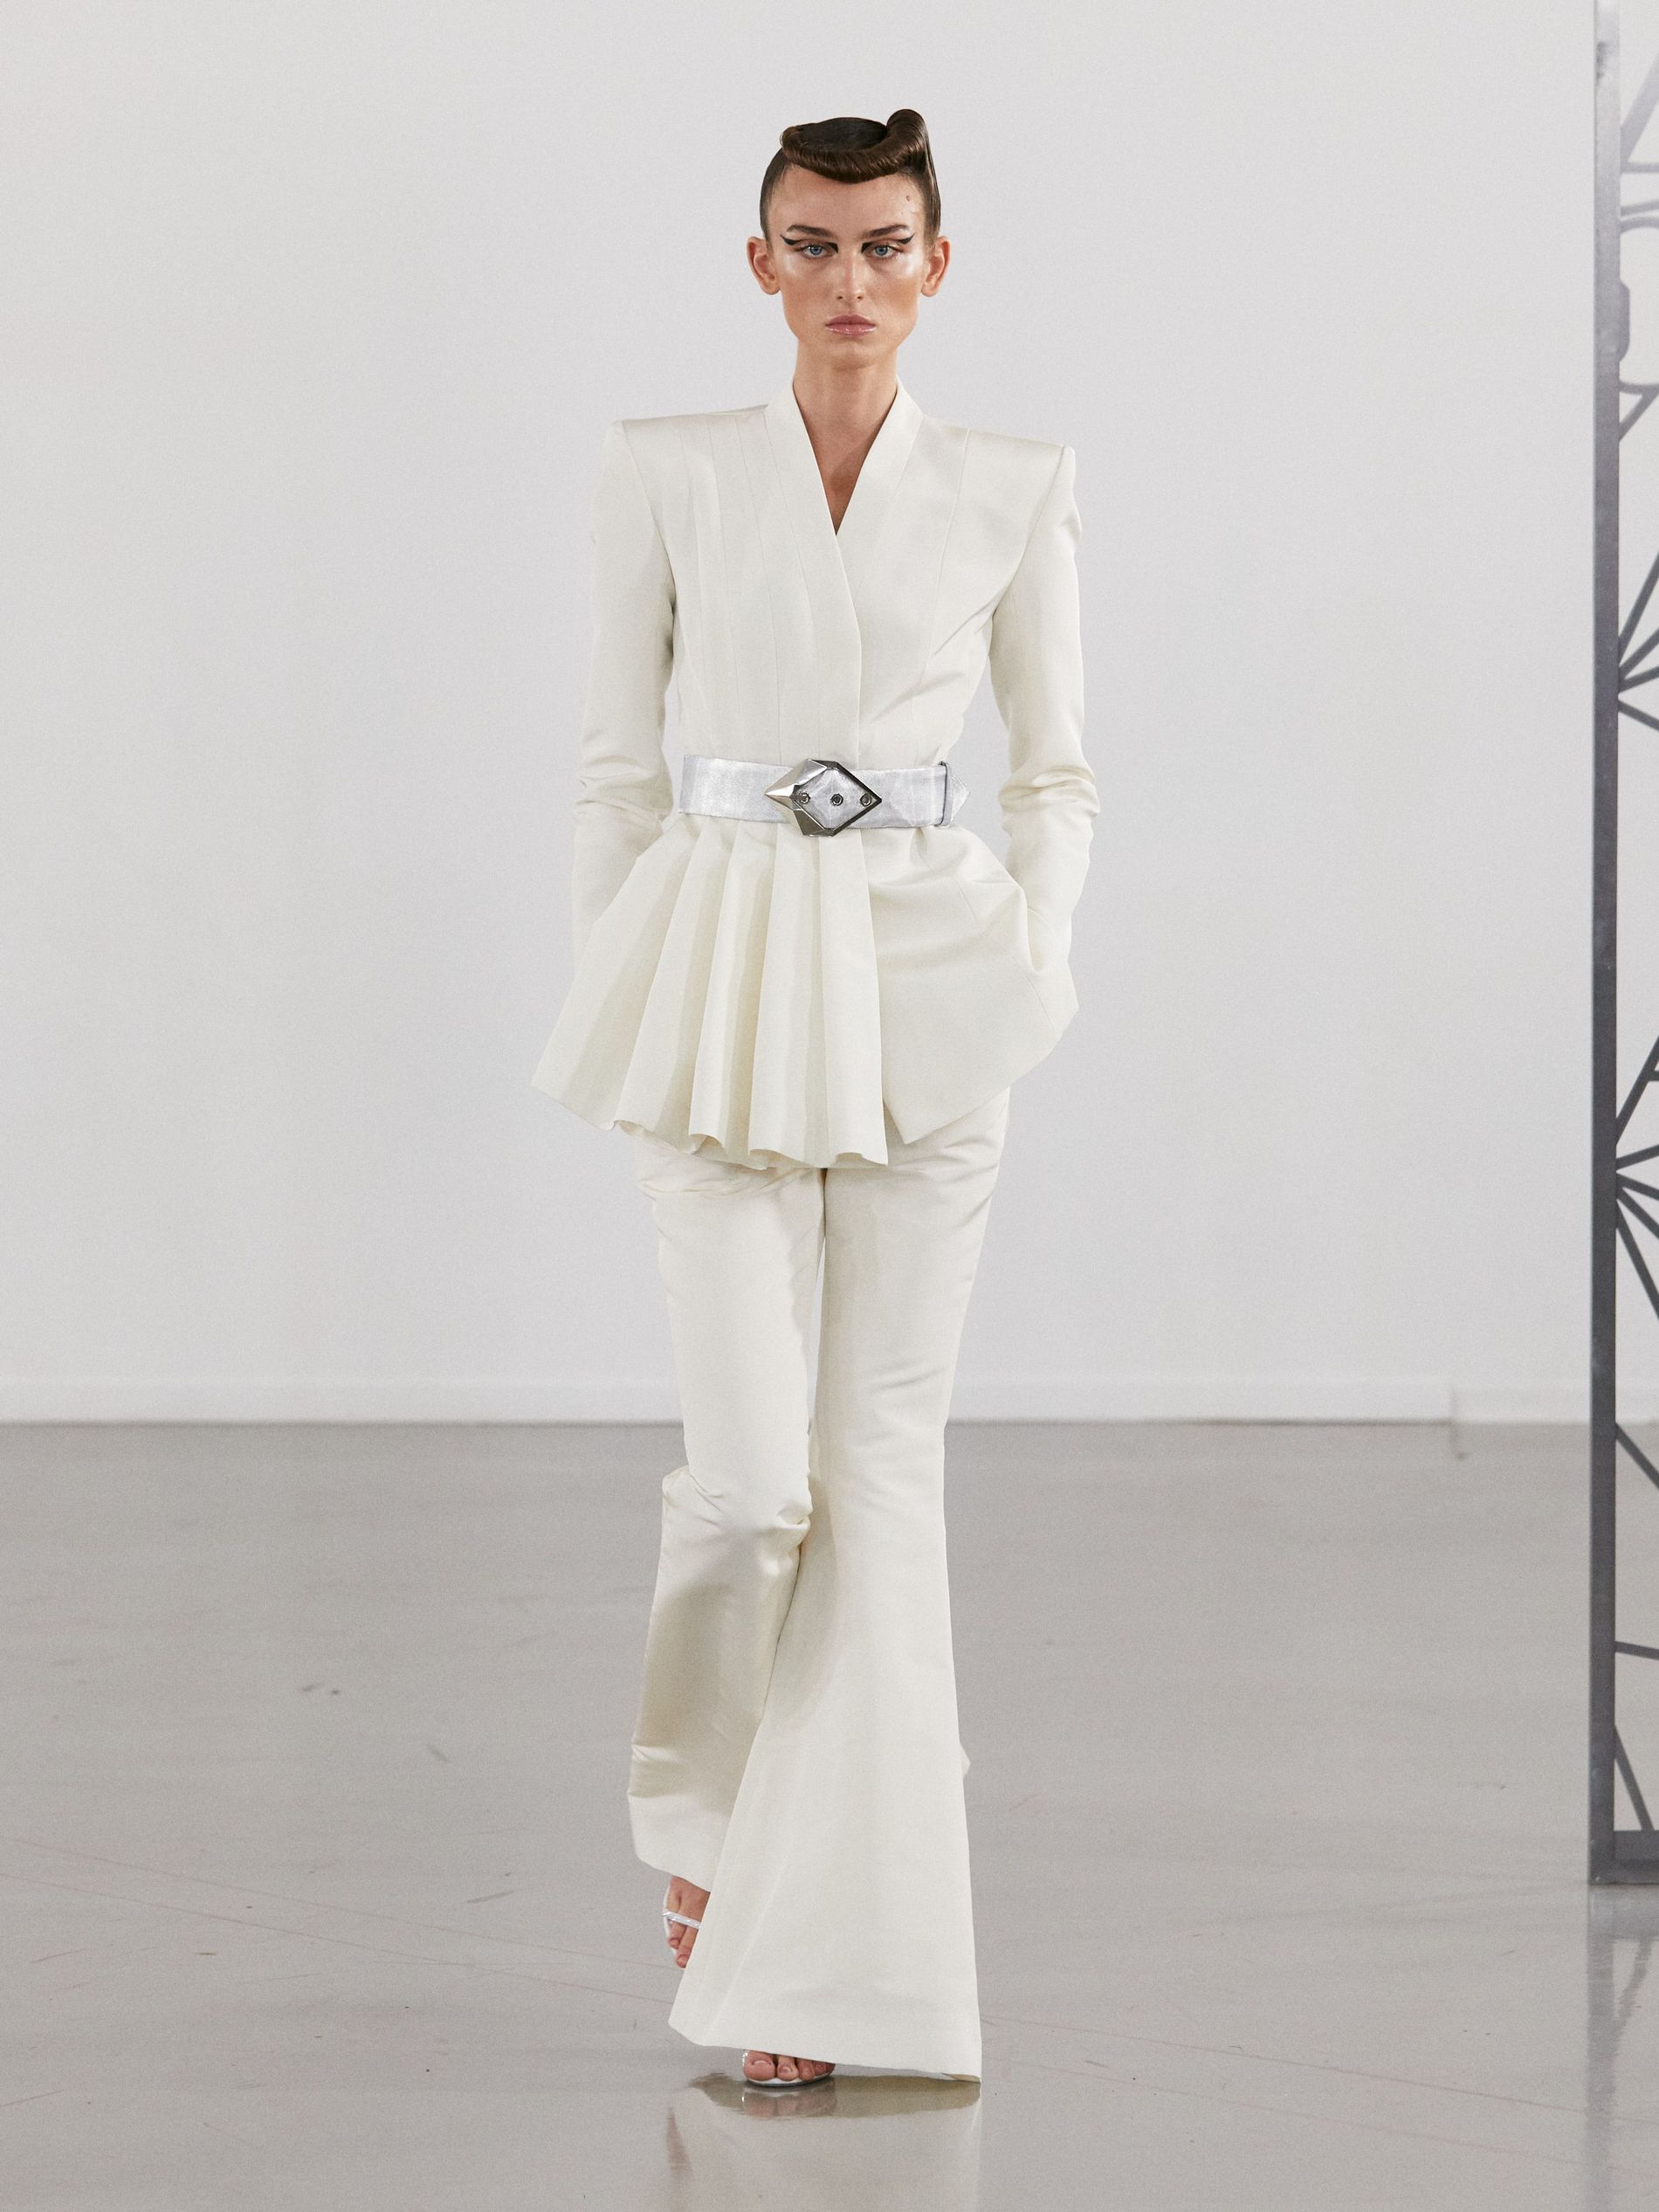 ArdAzAei Takes the Paris Couture Catwalk to Mars, Persia and Sweden with  Her Far Out, Radical, Seasonless Slow Fashion!